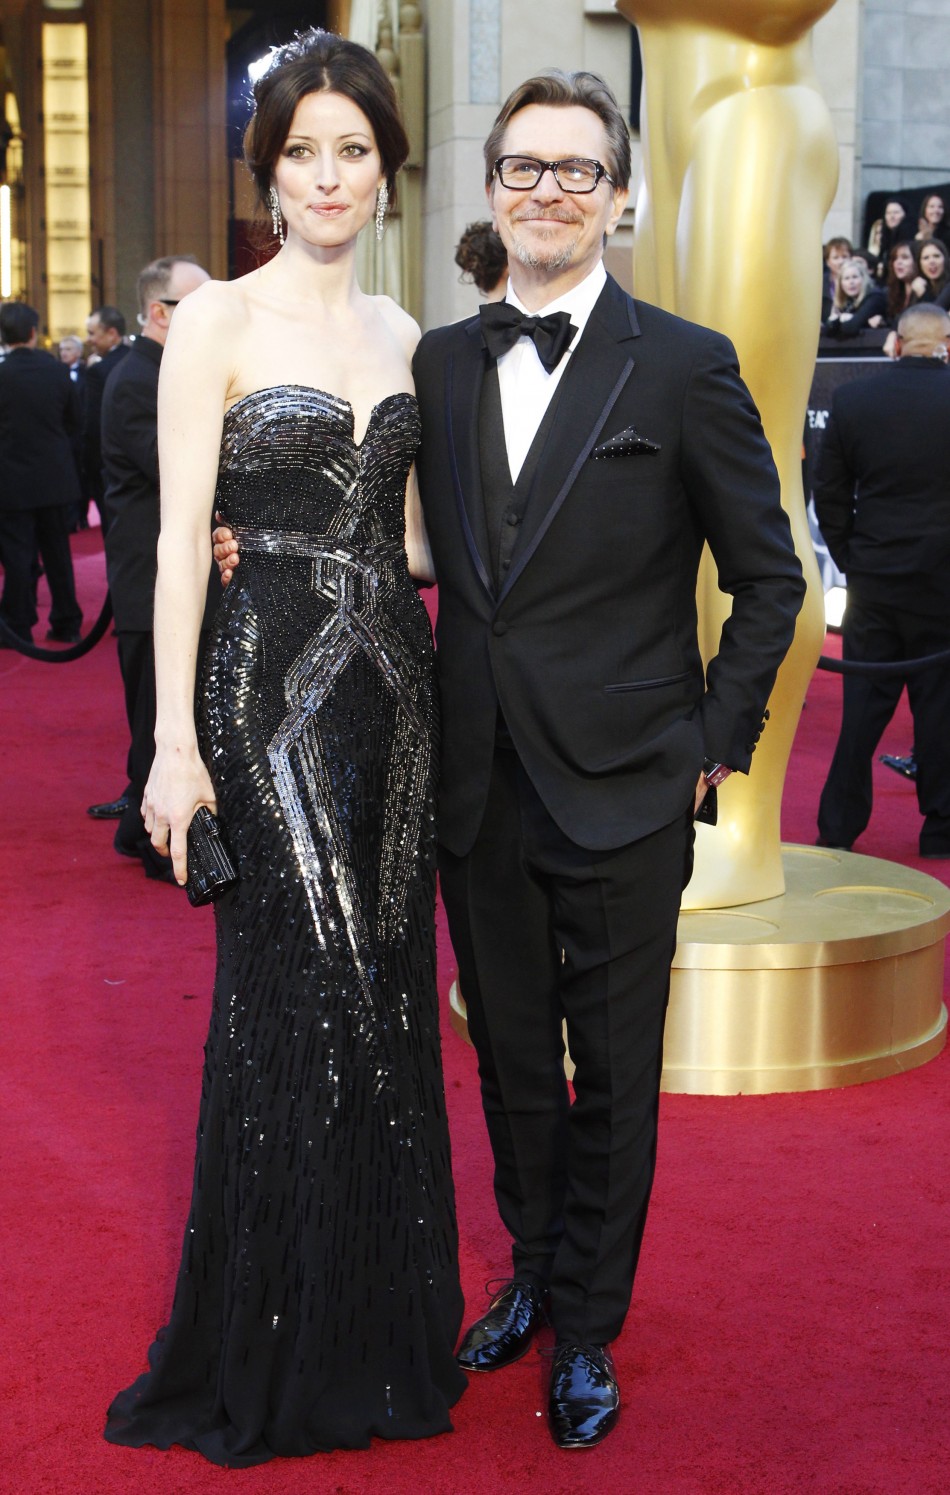 Gary Oldman, best actor nominee for his role in quotTinker Tailor Soldier Spyquot, and his wife Alexandra Edenborough arrive at the 84th Academy Awards in Hollywood